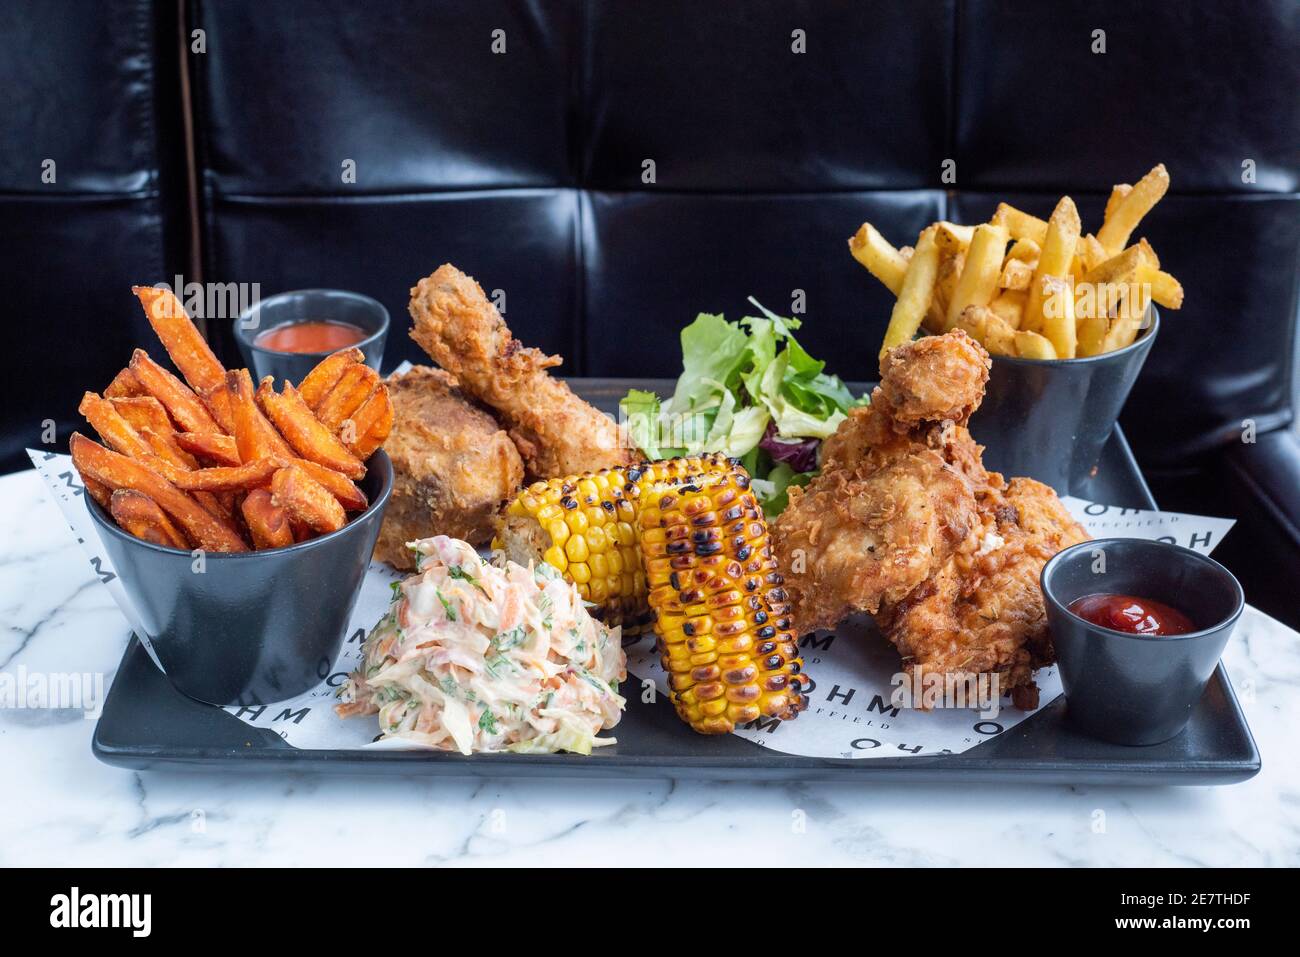 Sheffield, UK - 03 Aug 2017: Southern fried chicken and fries share platter with coleslaw and corn on the cob at OHM, Fitzwilliam Street Stock Photo